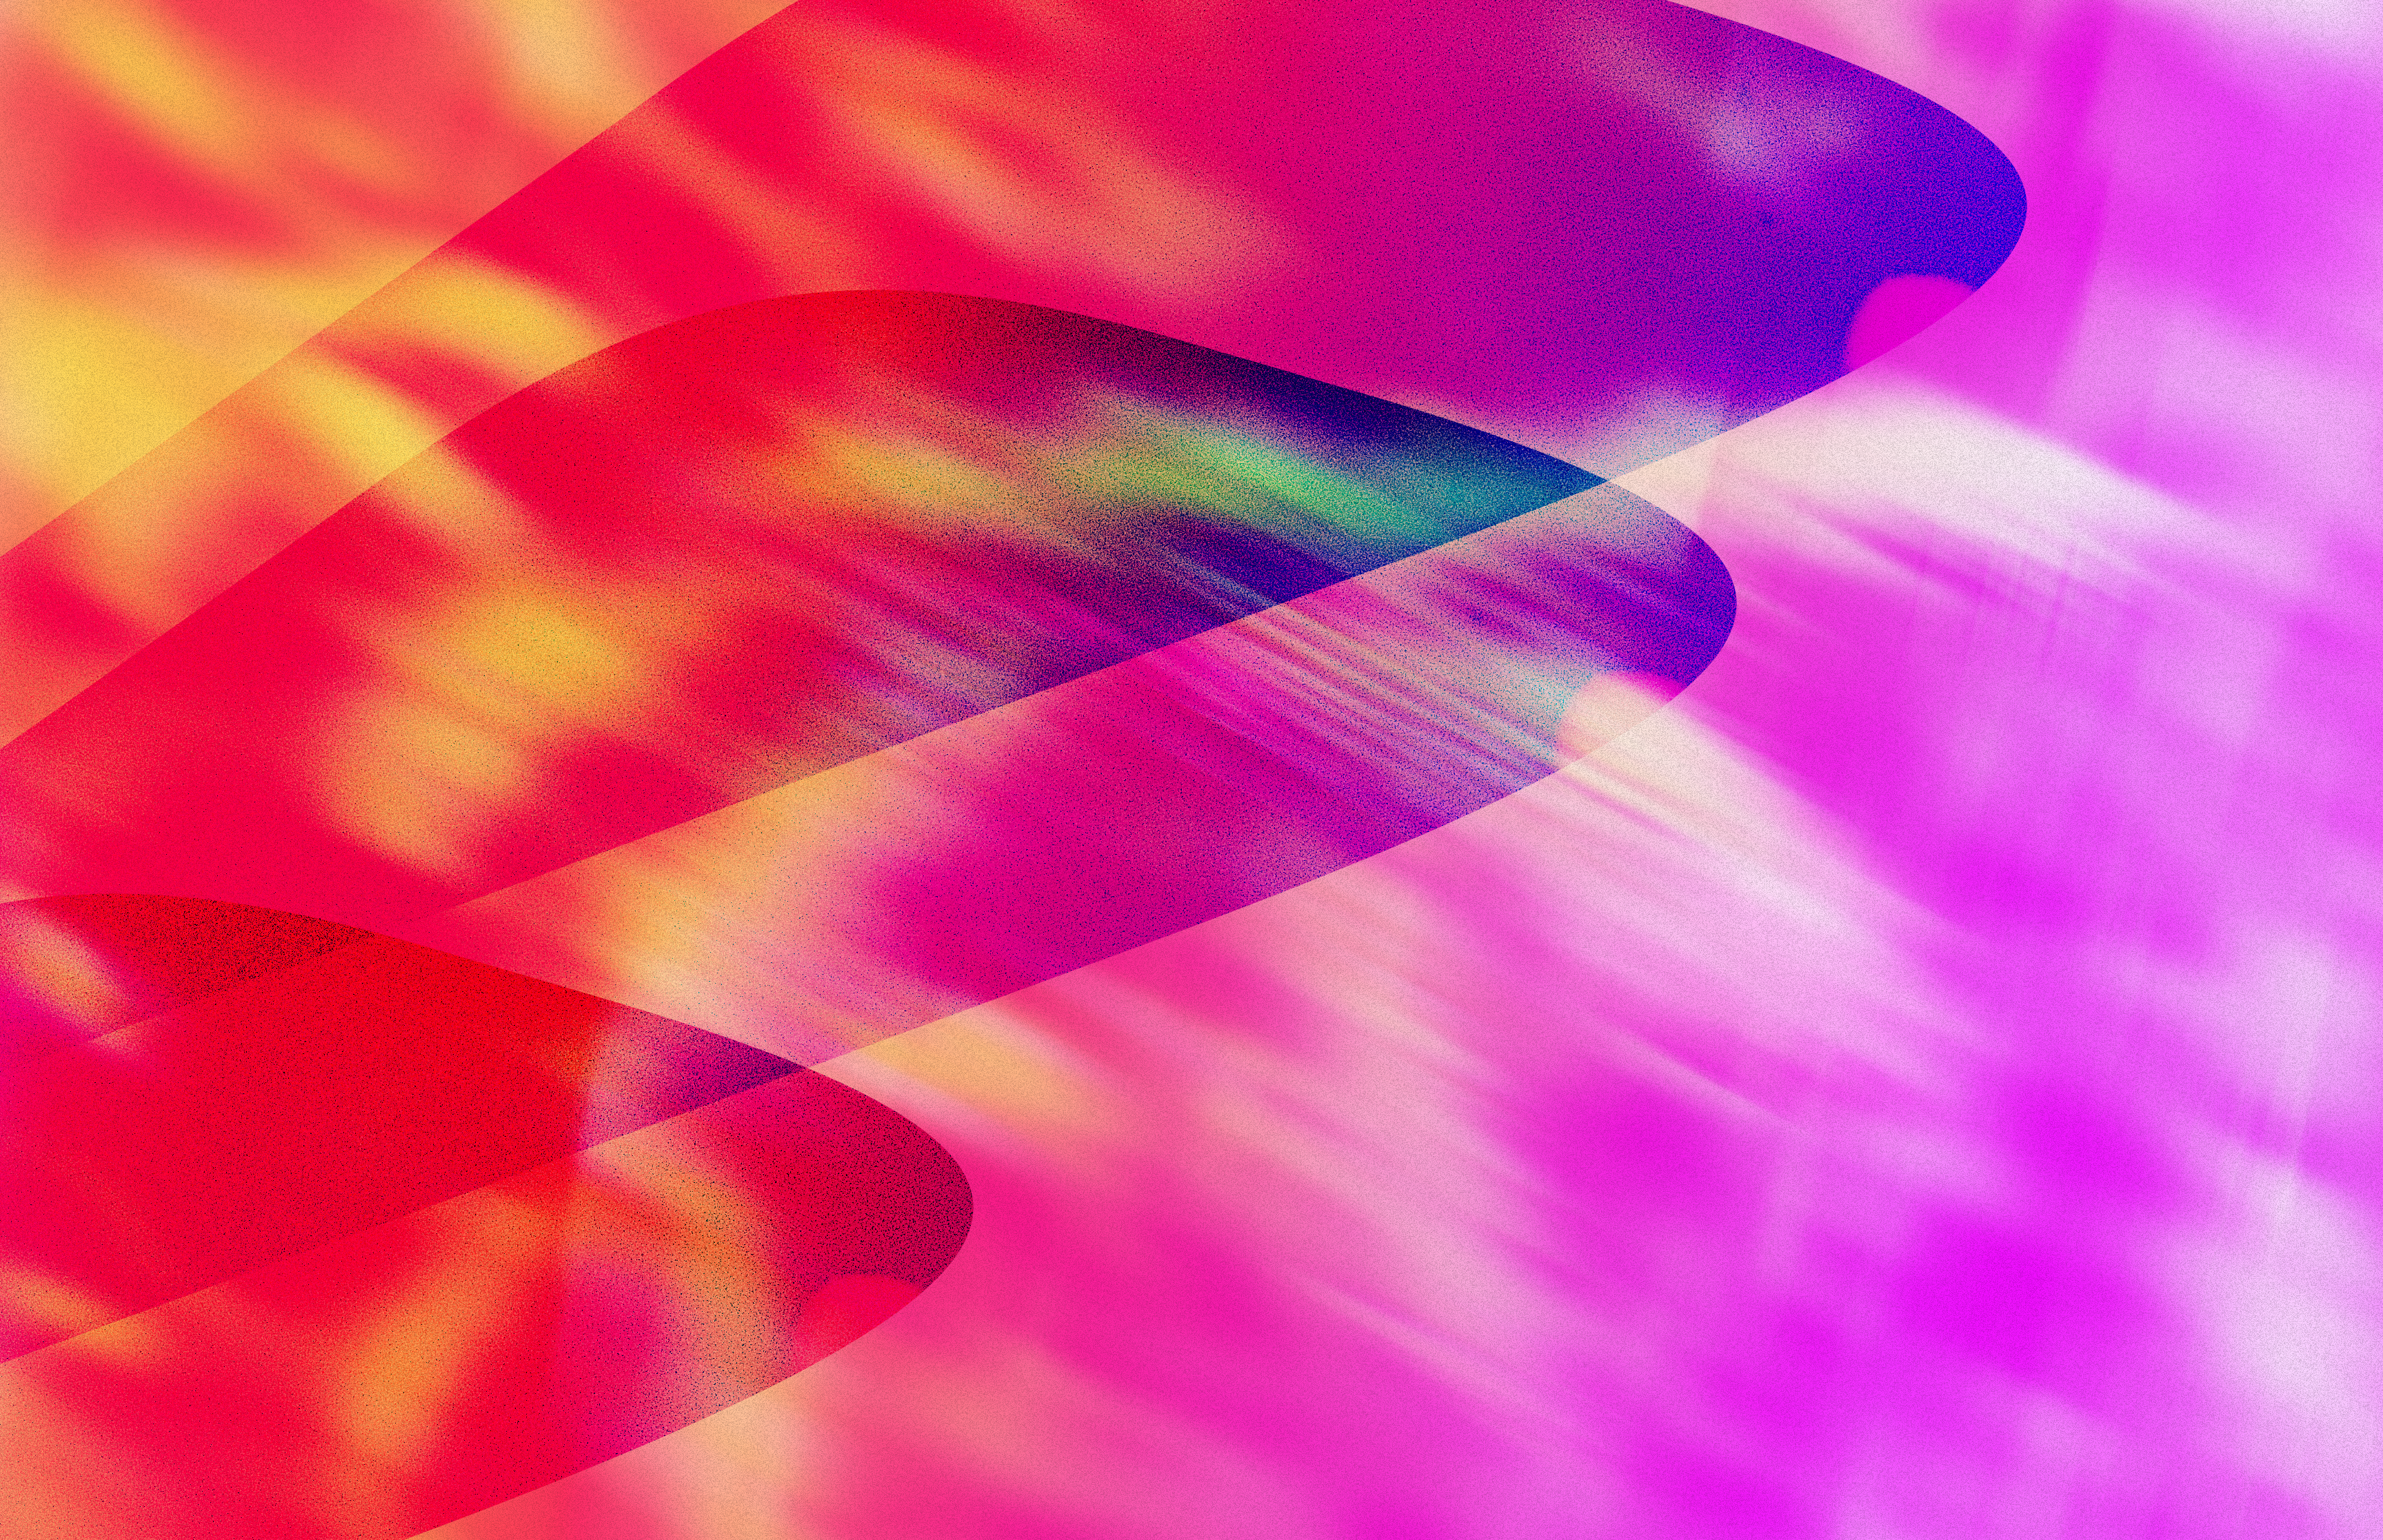 Abstract Wavy Lines Digital Art Minimalism Simple Background Colorful 3456x2234